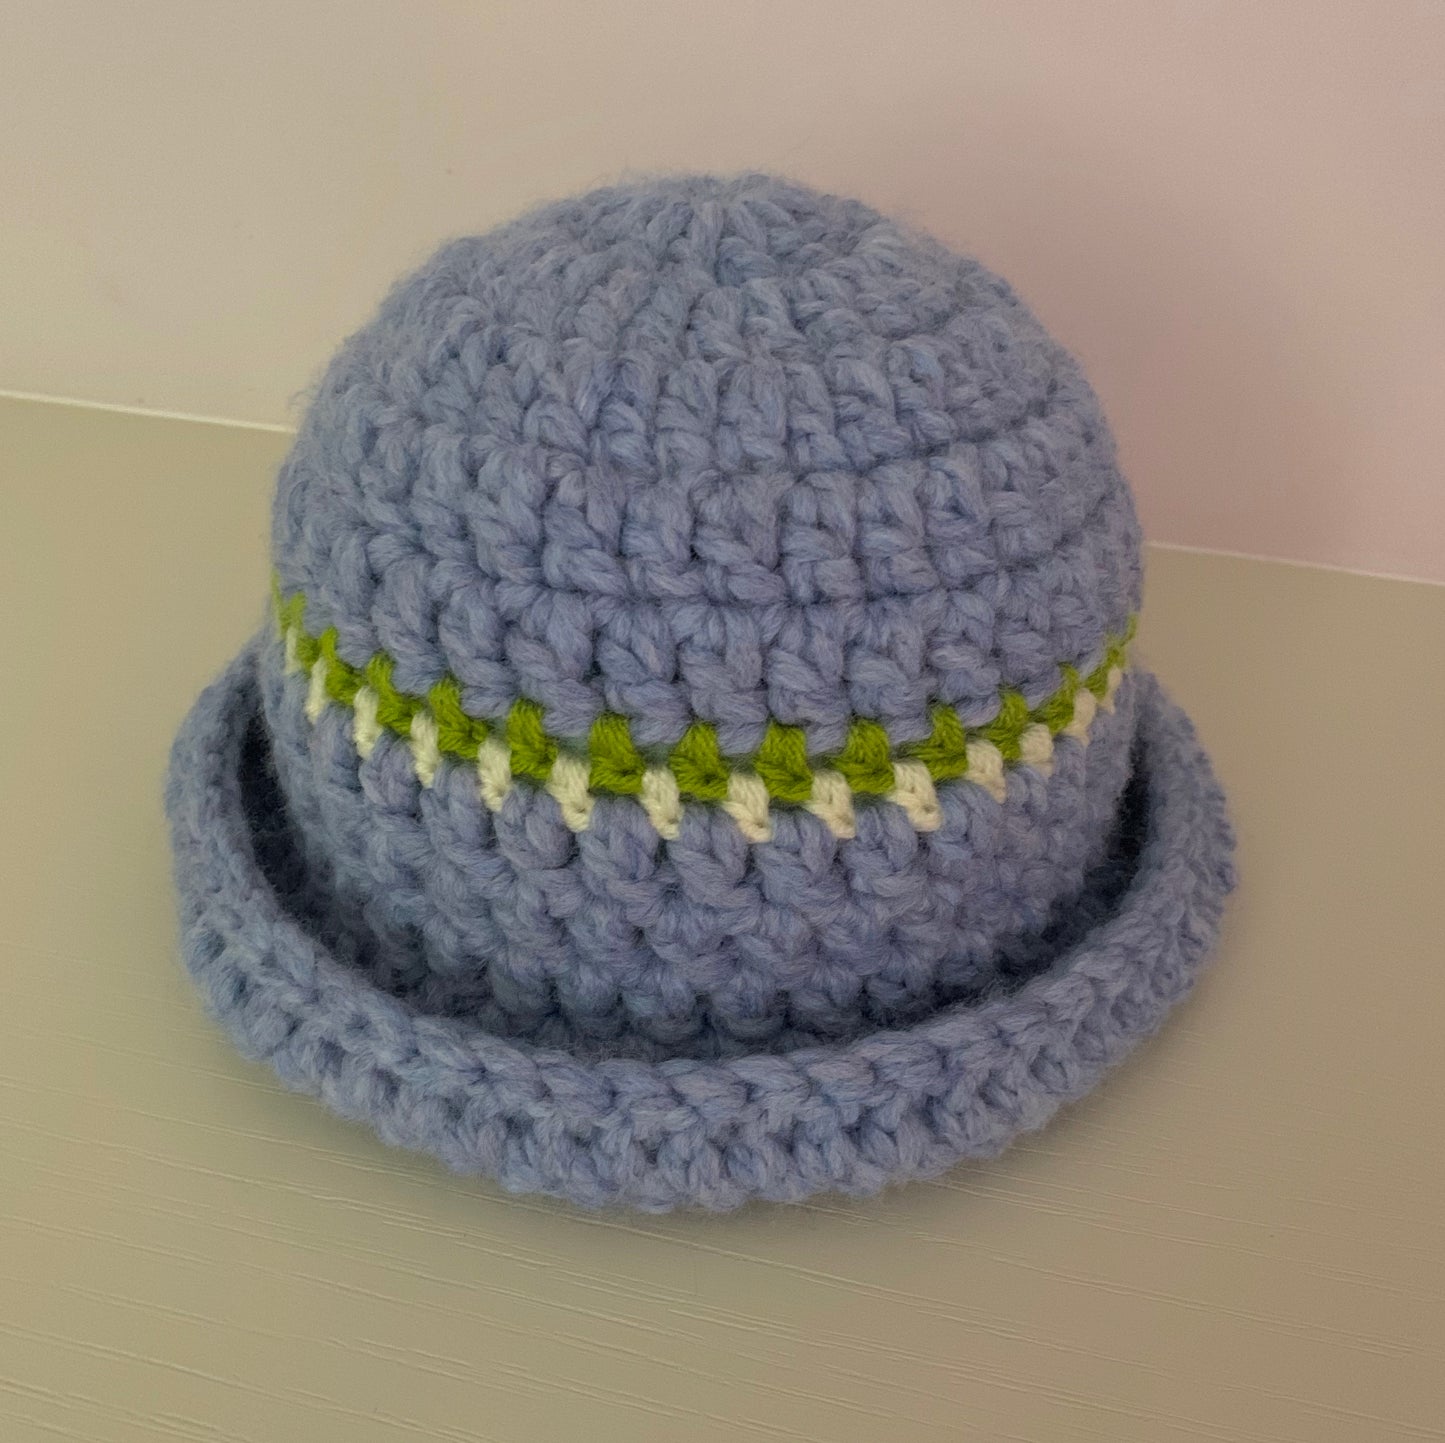 Handmade cornflower blue chunky crochet bowler hat with olive green and cream stripes